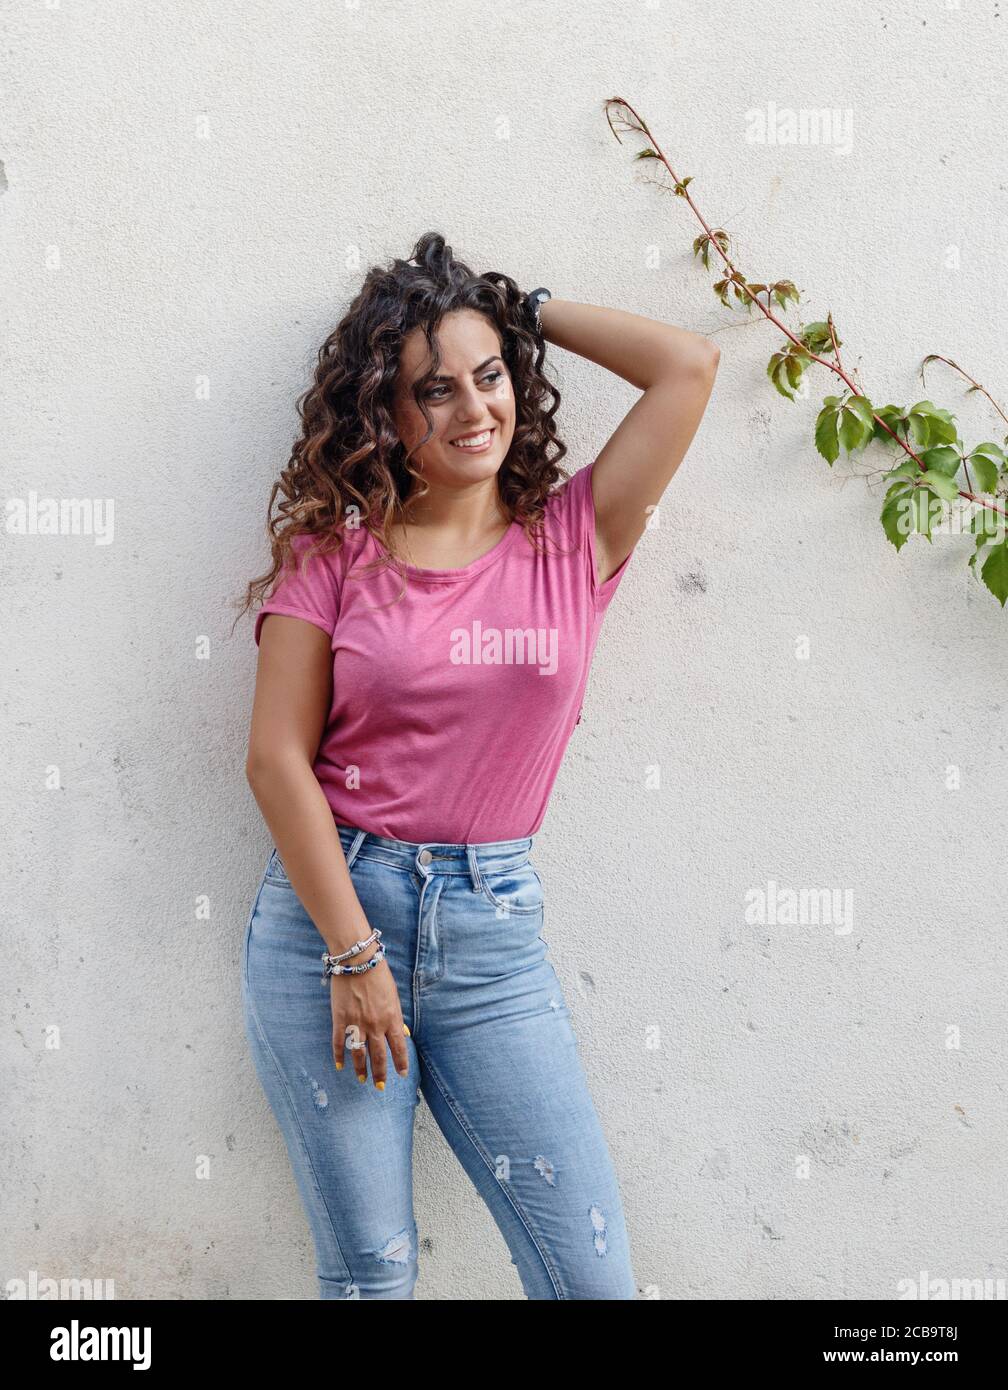 Young women wearing t-shirt and jeans stays near a wall and smile Stock Photo